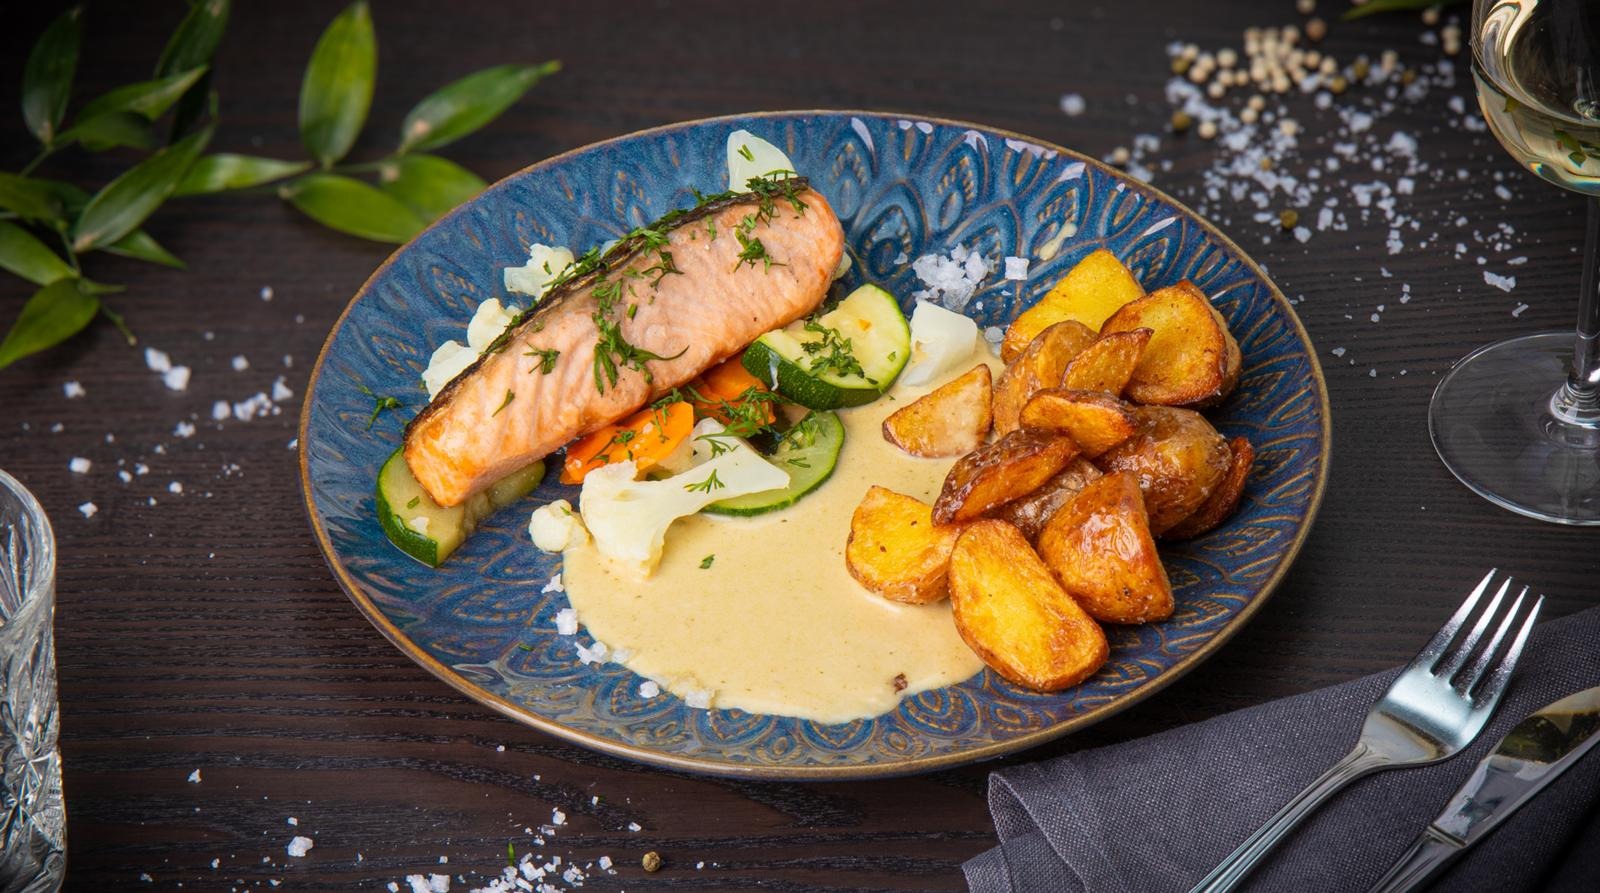 Grilled salmon with lemon herb sauce, summer vegetables and roasted potatoes